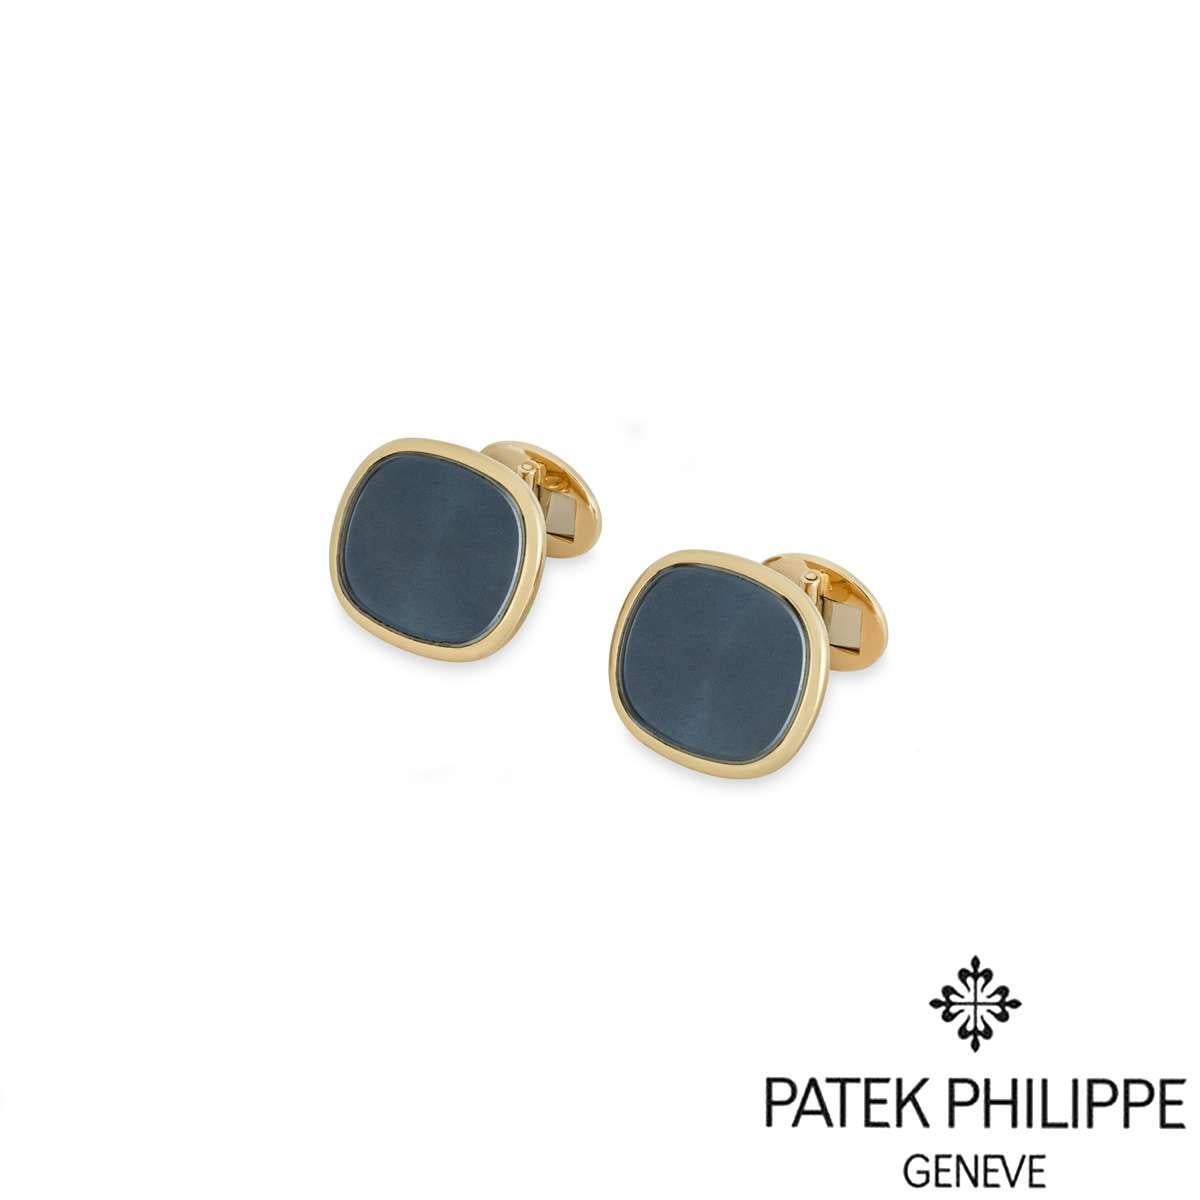 A pair of 18k yellow gold large Ellipse cufflinks by Patek Philippe. Each cufflink is set with a sunburst blue panel surrounded by a high polish border. The cufflinks measure 2.2cm in width, 1.9cm in height, and 2.2cm in depth. With t-bar fittings,